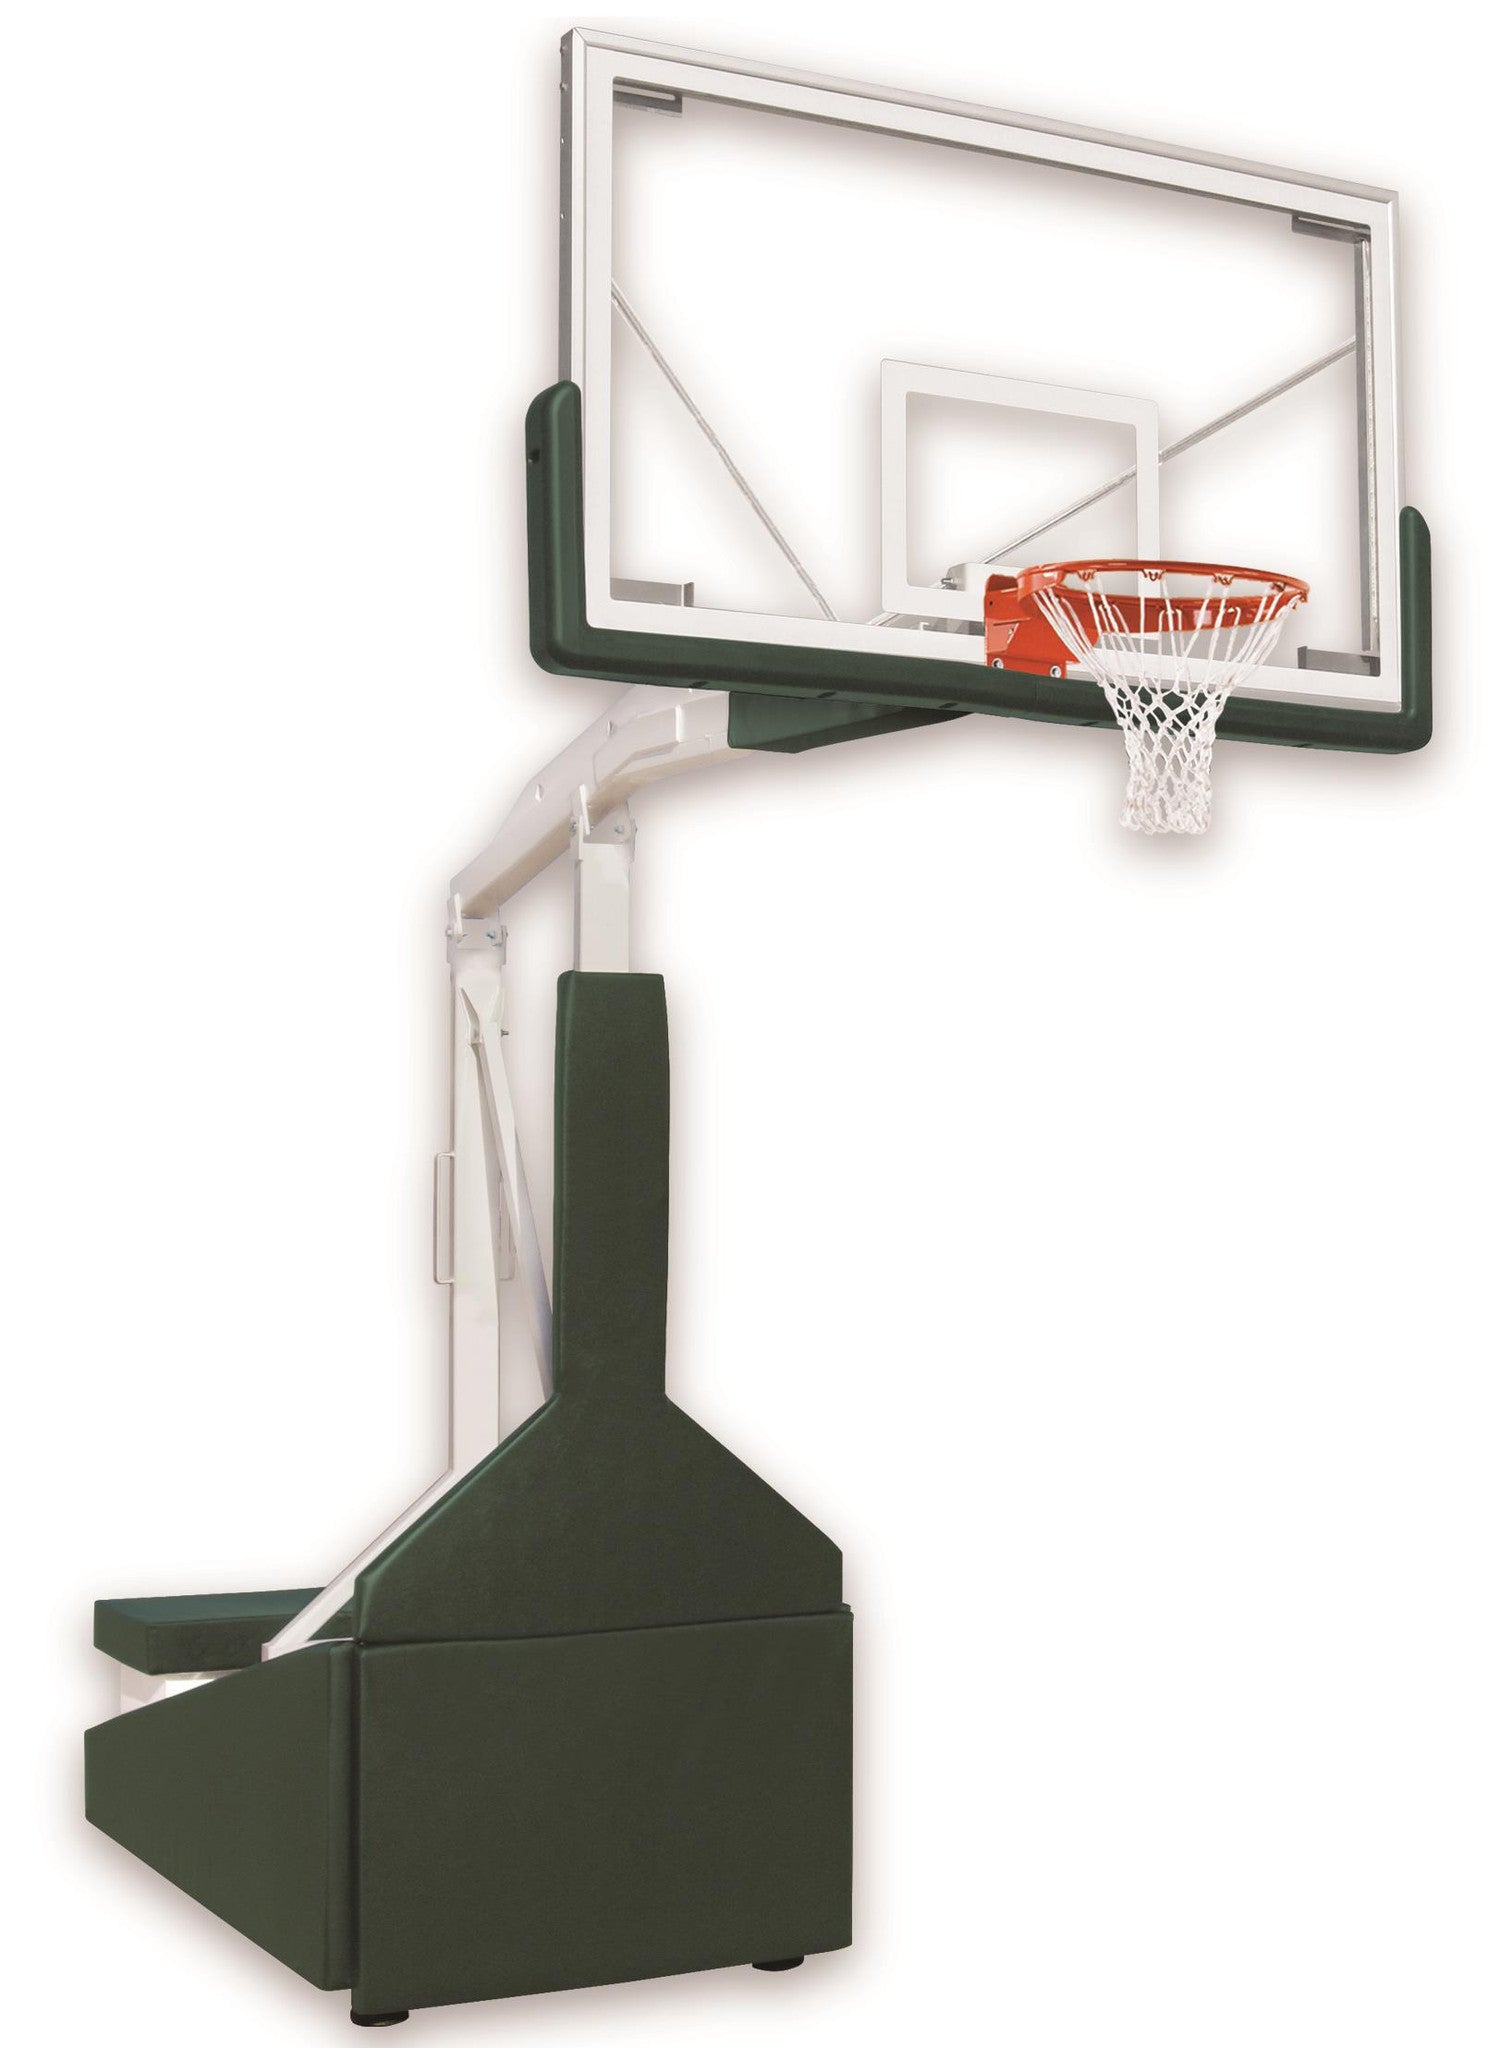 https://njswingsets.com/cdn/shop/products/First-Team-Tempest-Triumph-FL-Portable-Adjustable-Basketball-Hoop-72-inch-Tempured-Glass-for-Floating-Floors_82b71aa0-b670-42ae-9784-7336e239af0a_1512x.jpeg?v=1523065463